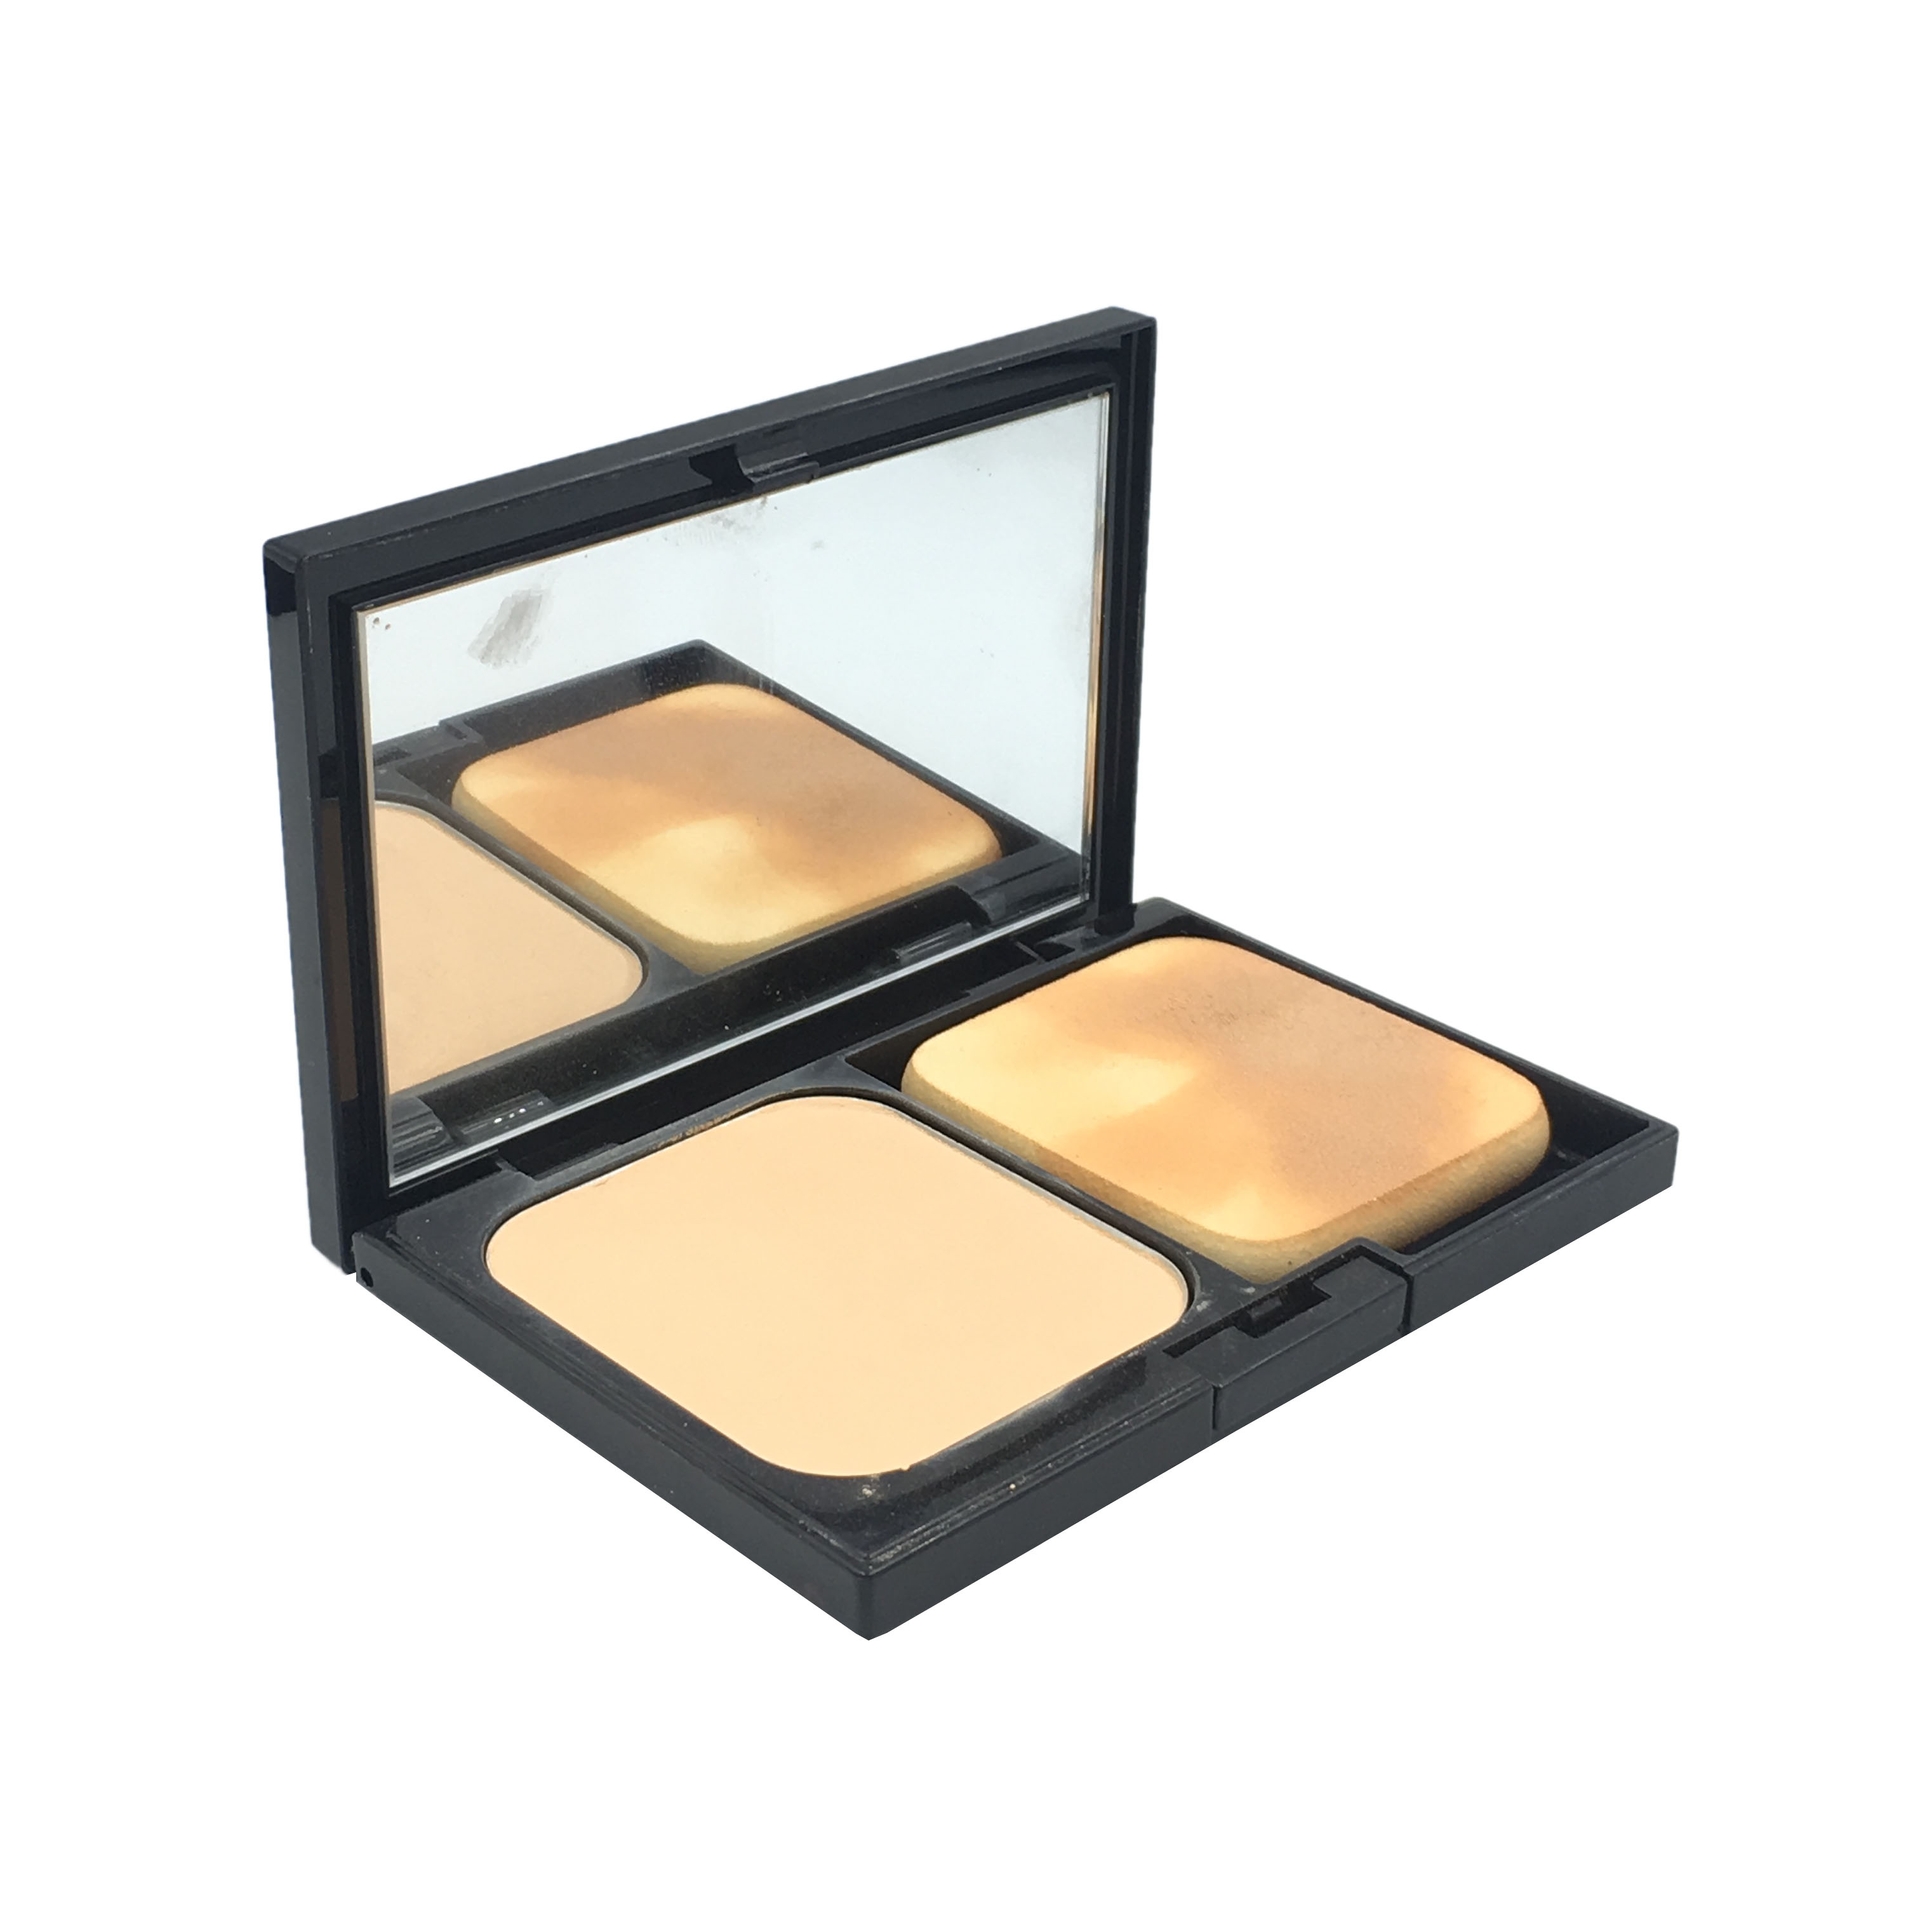 Private Collection Martinez Professionel Dramatic Glow Powder Foundation 01 Neutral Porcelain Faces